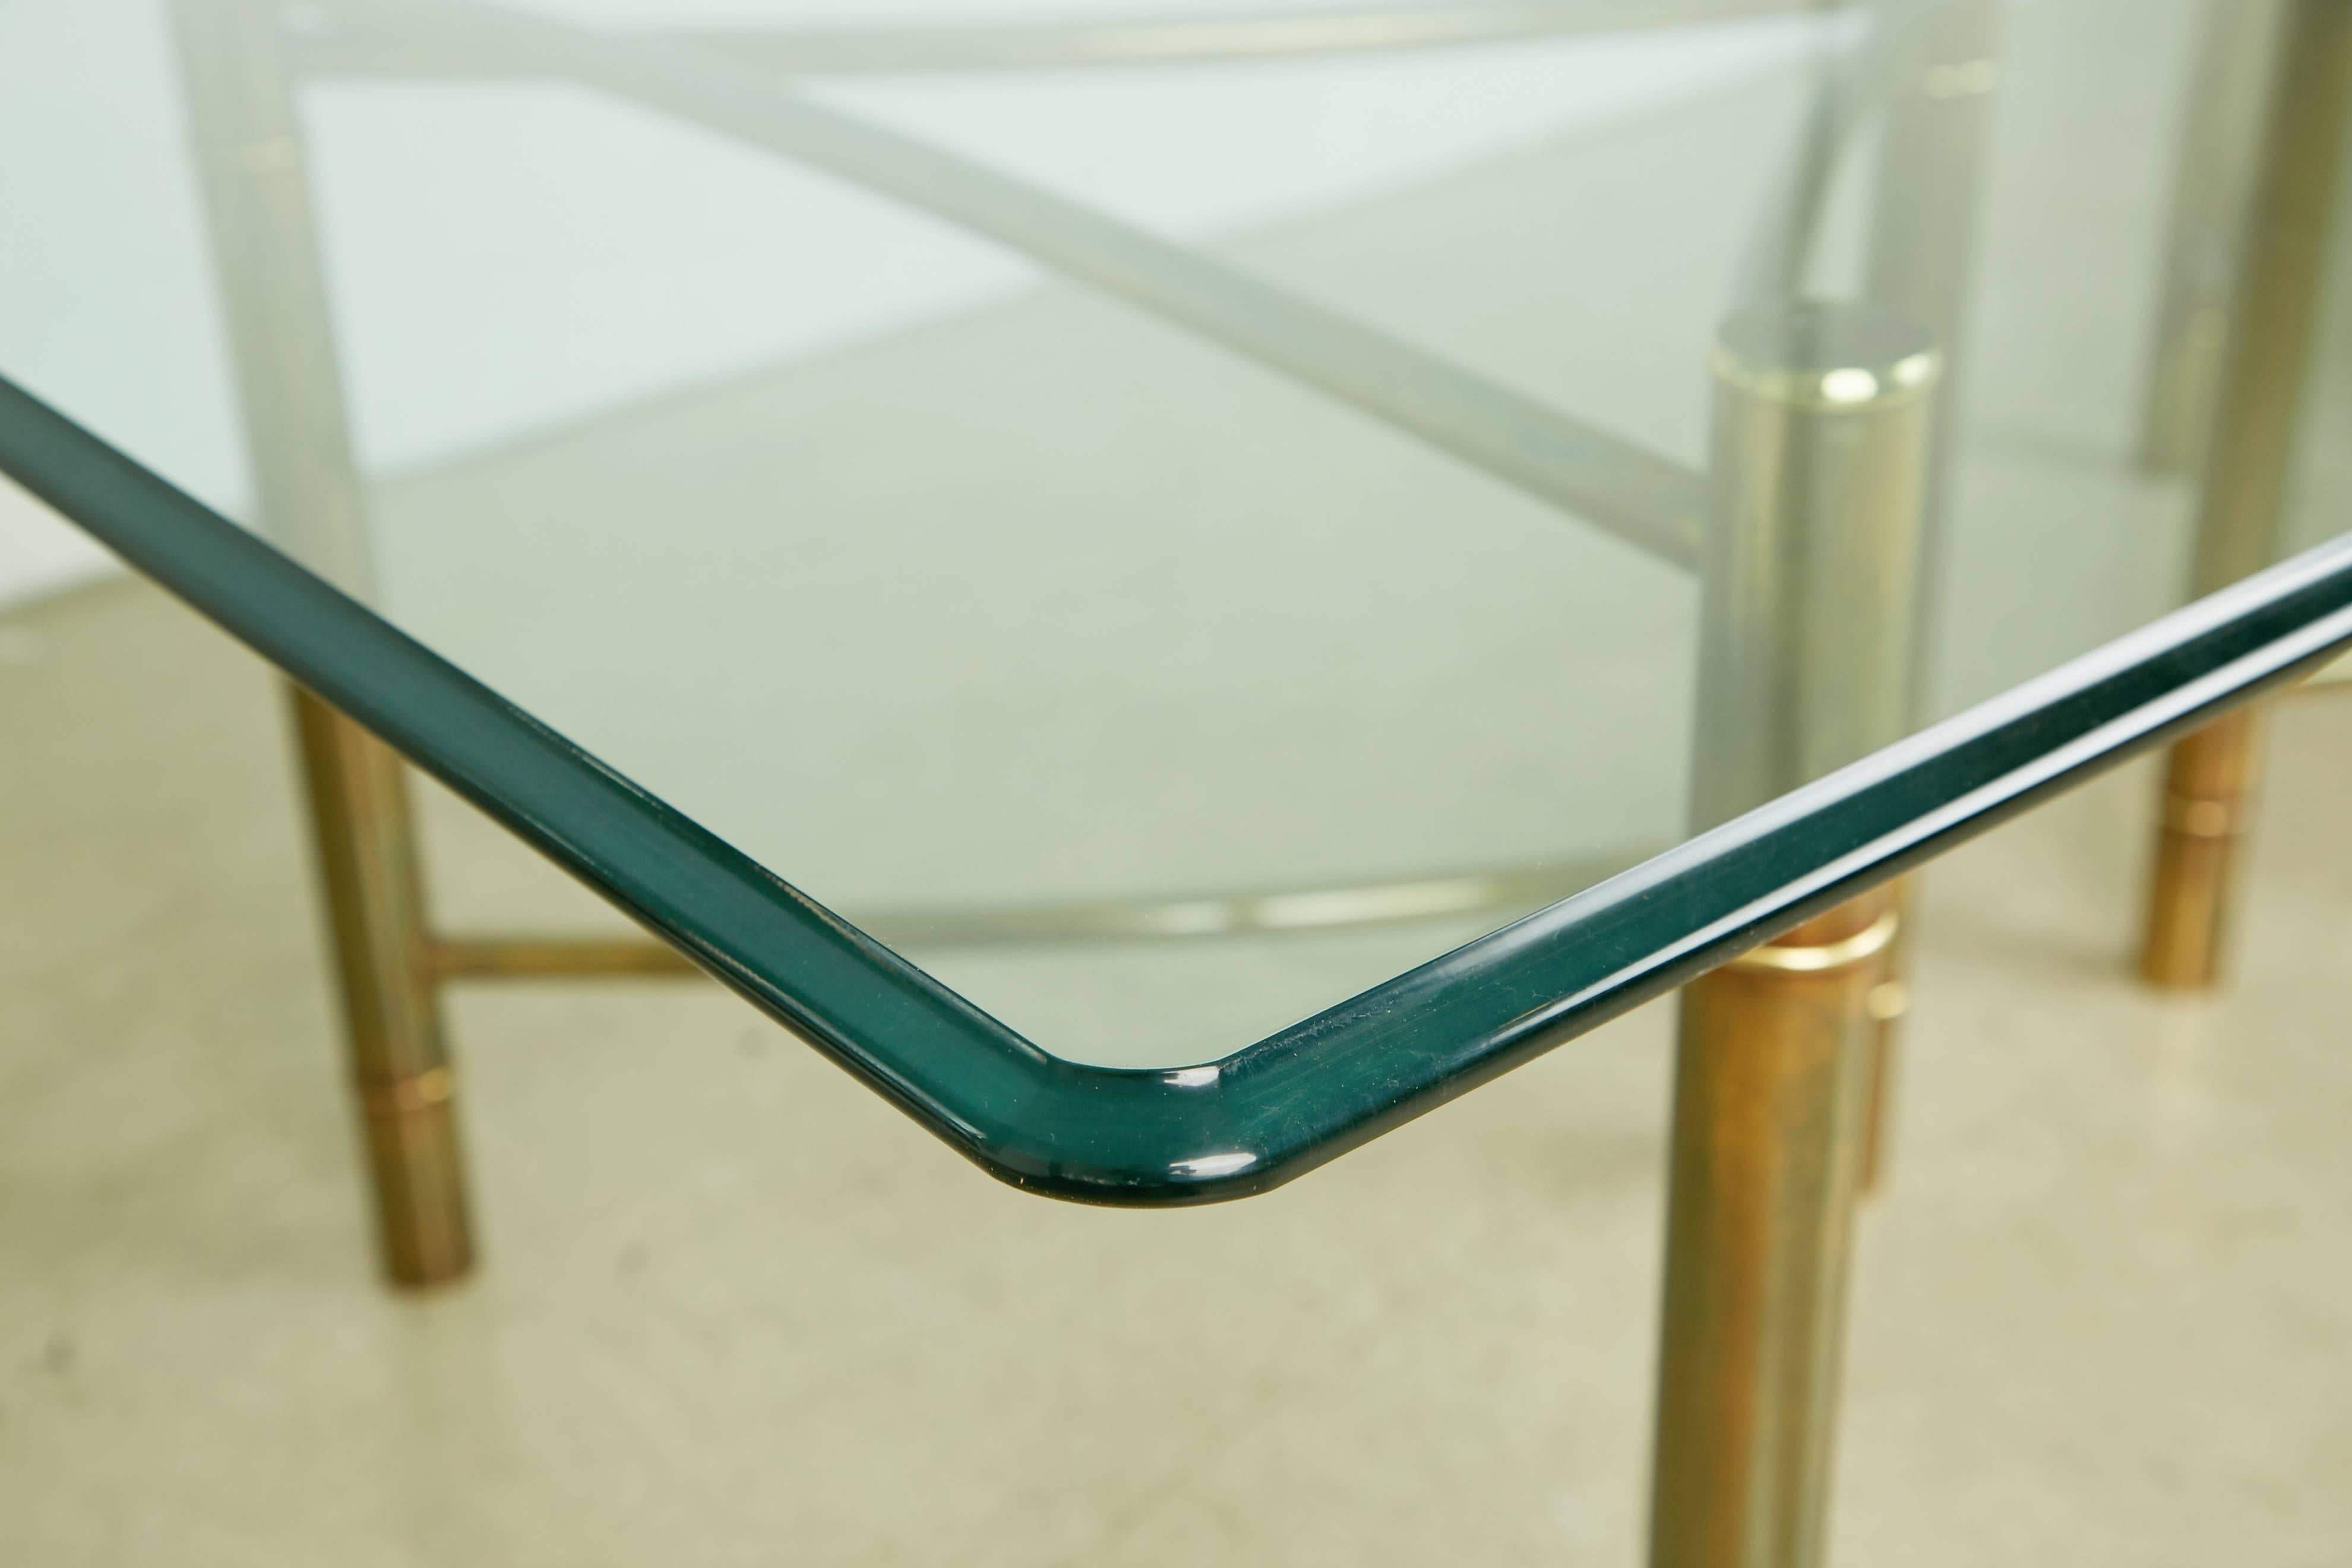 American Mastercraft Brass Dining Table with Triangular Bases, circa 1970